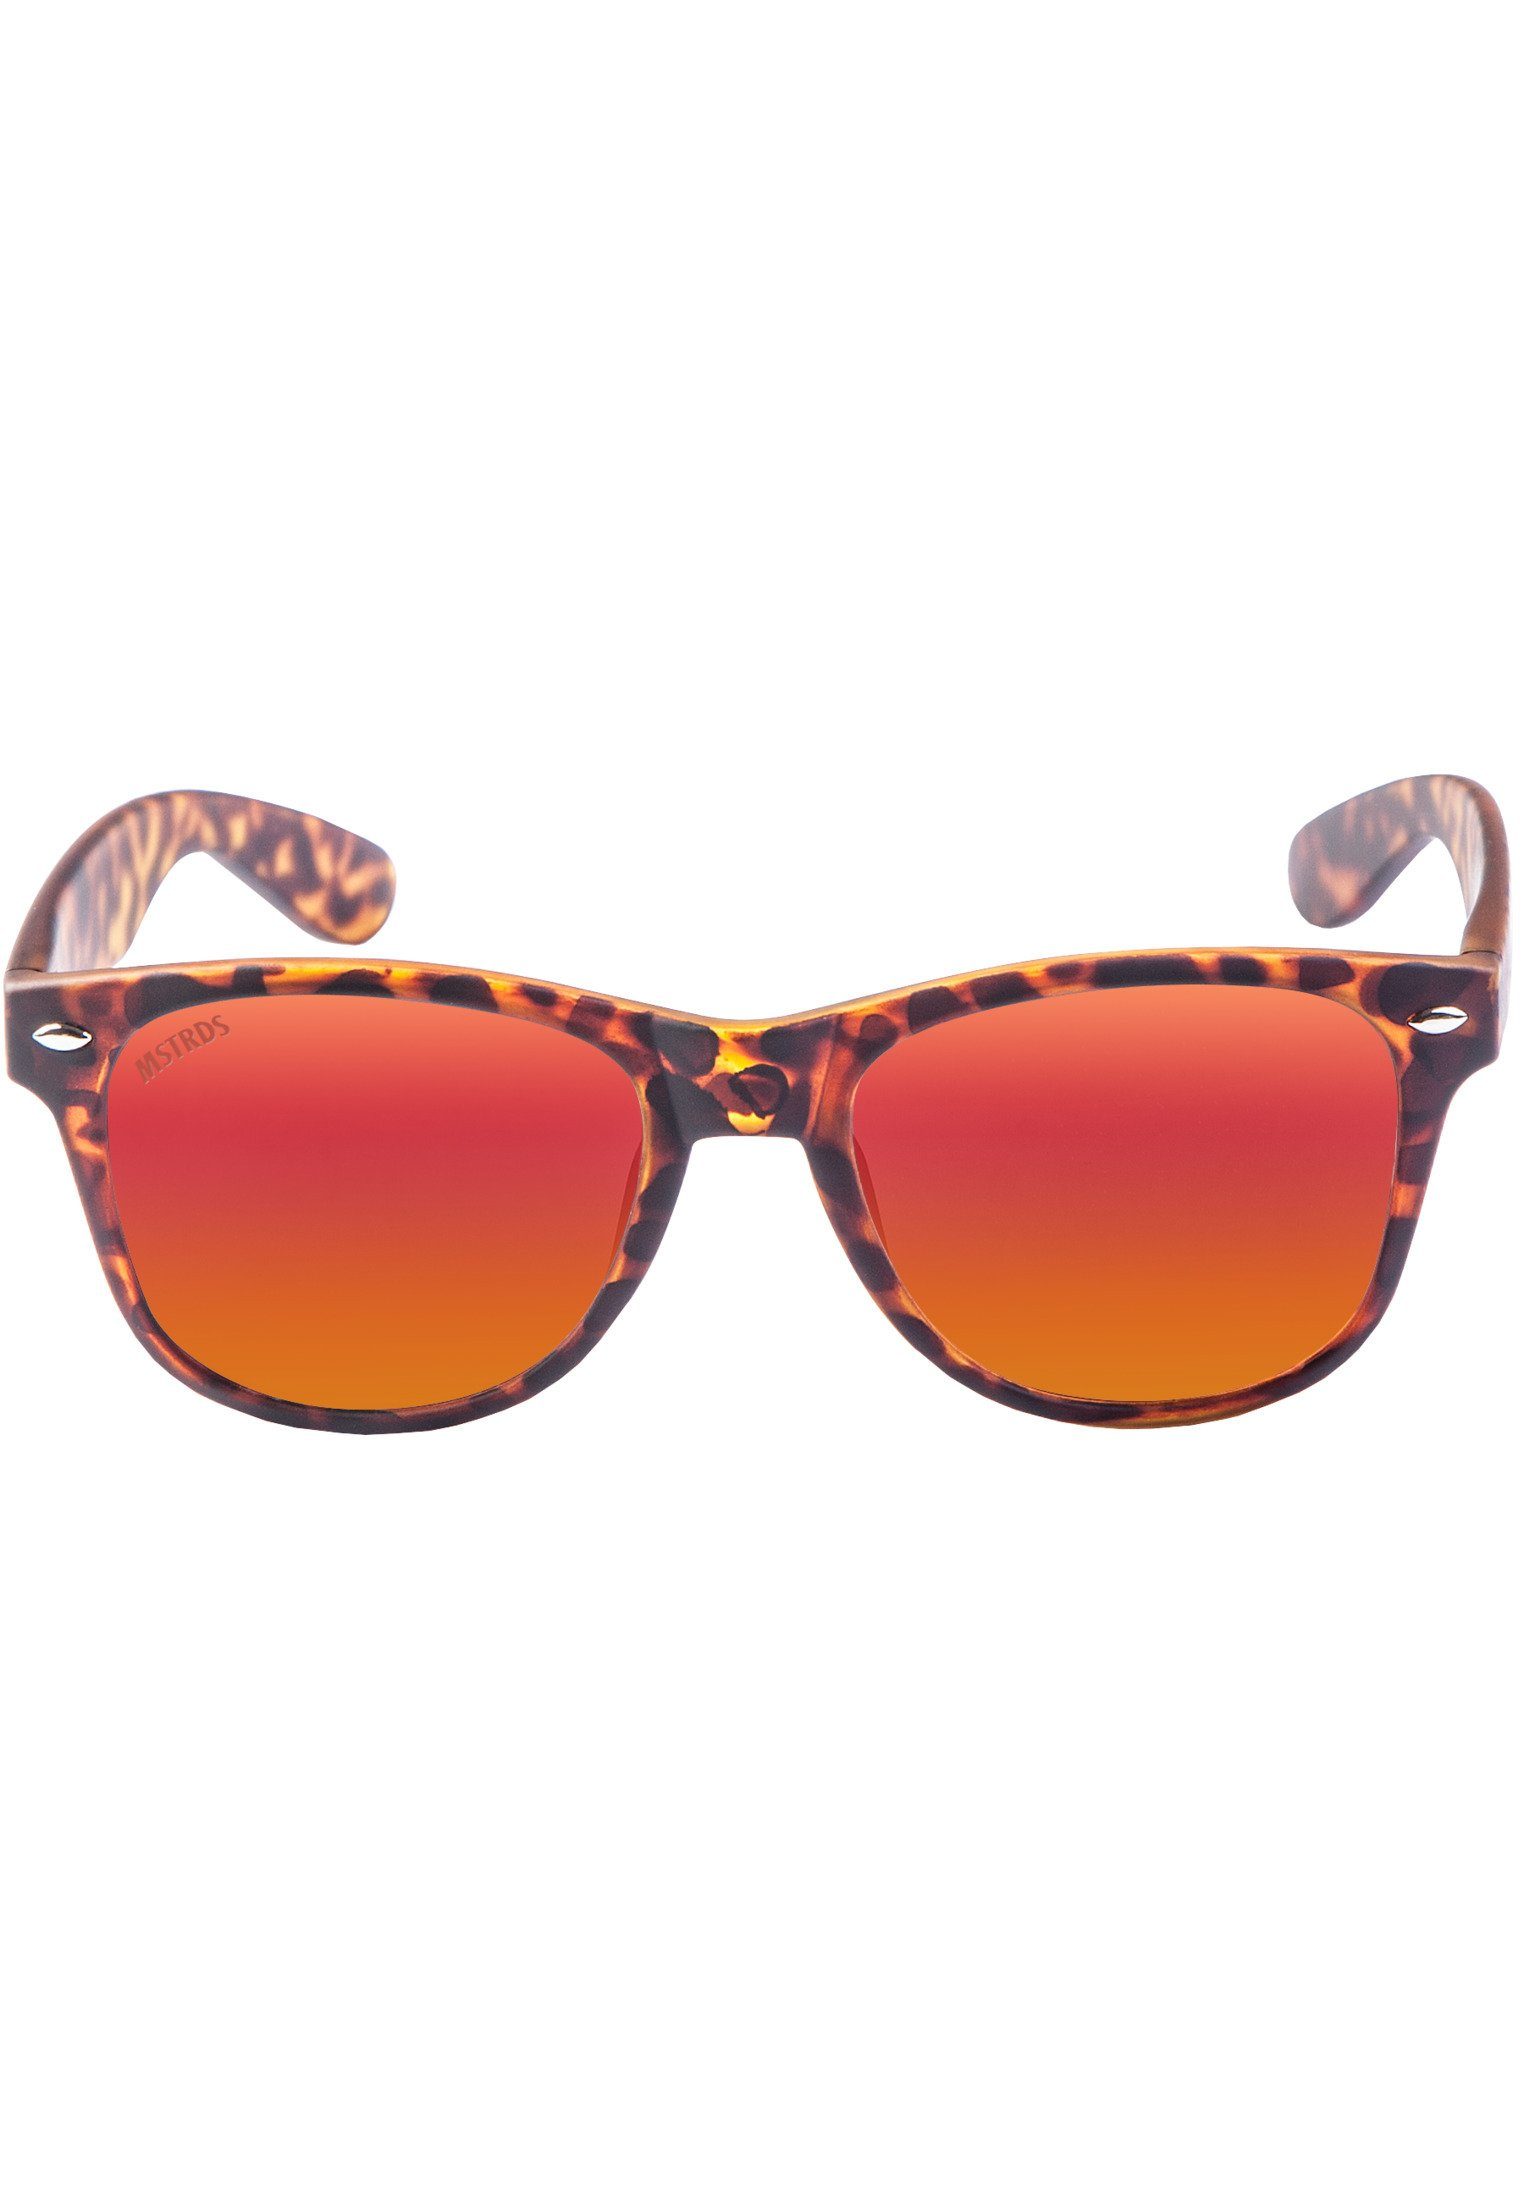 Youth Sunglasses Accessoires MSTRDS Sonnenbrille havanna/red Likoma